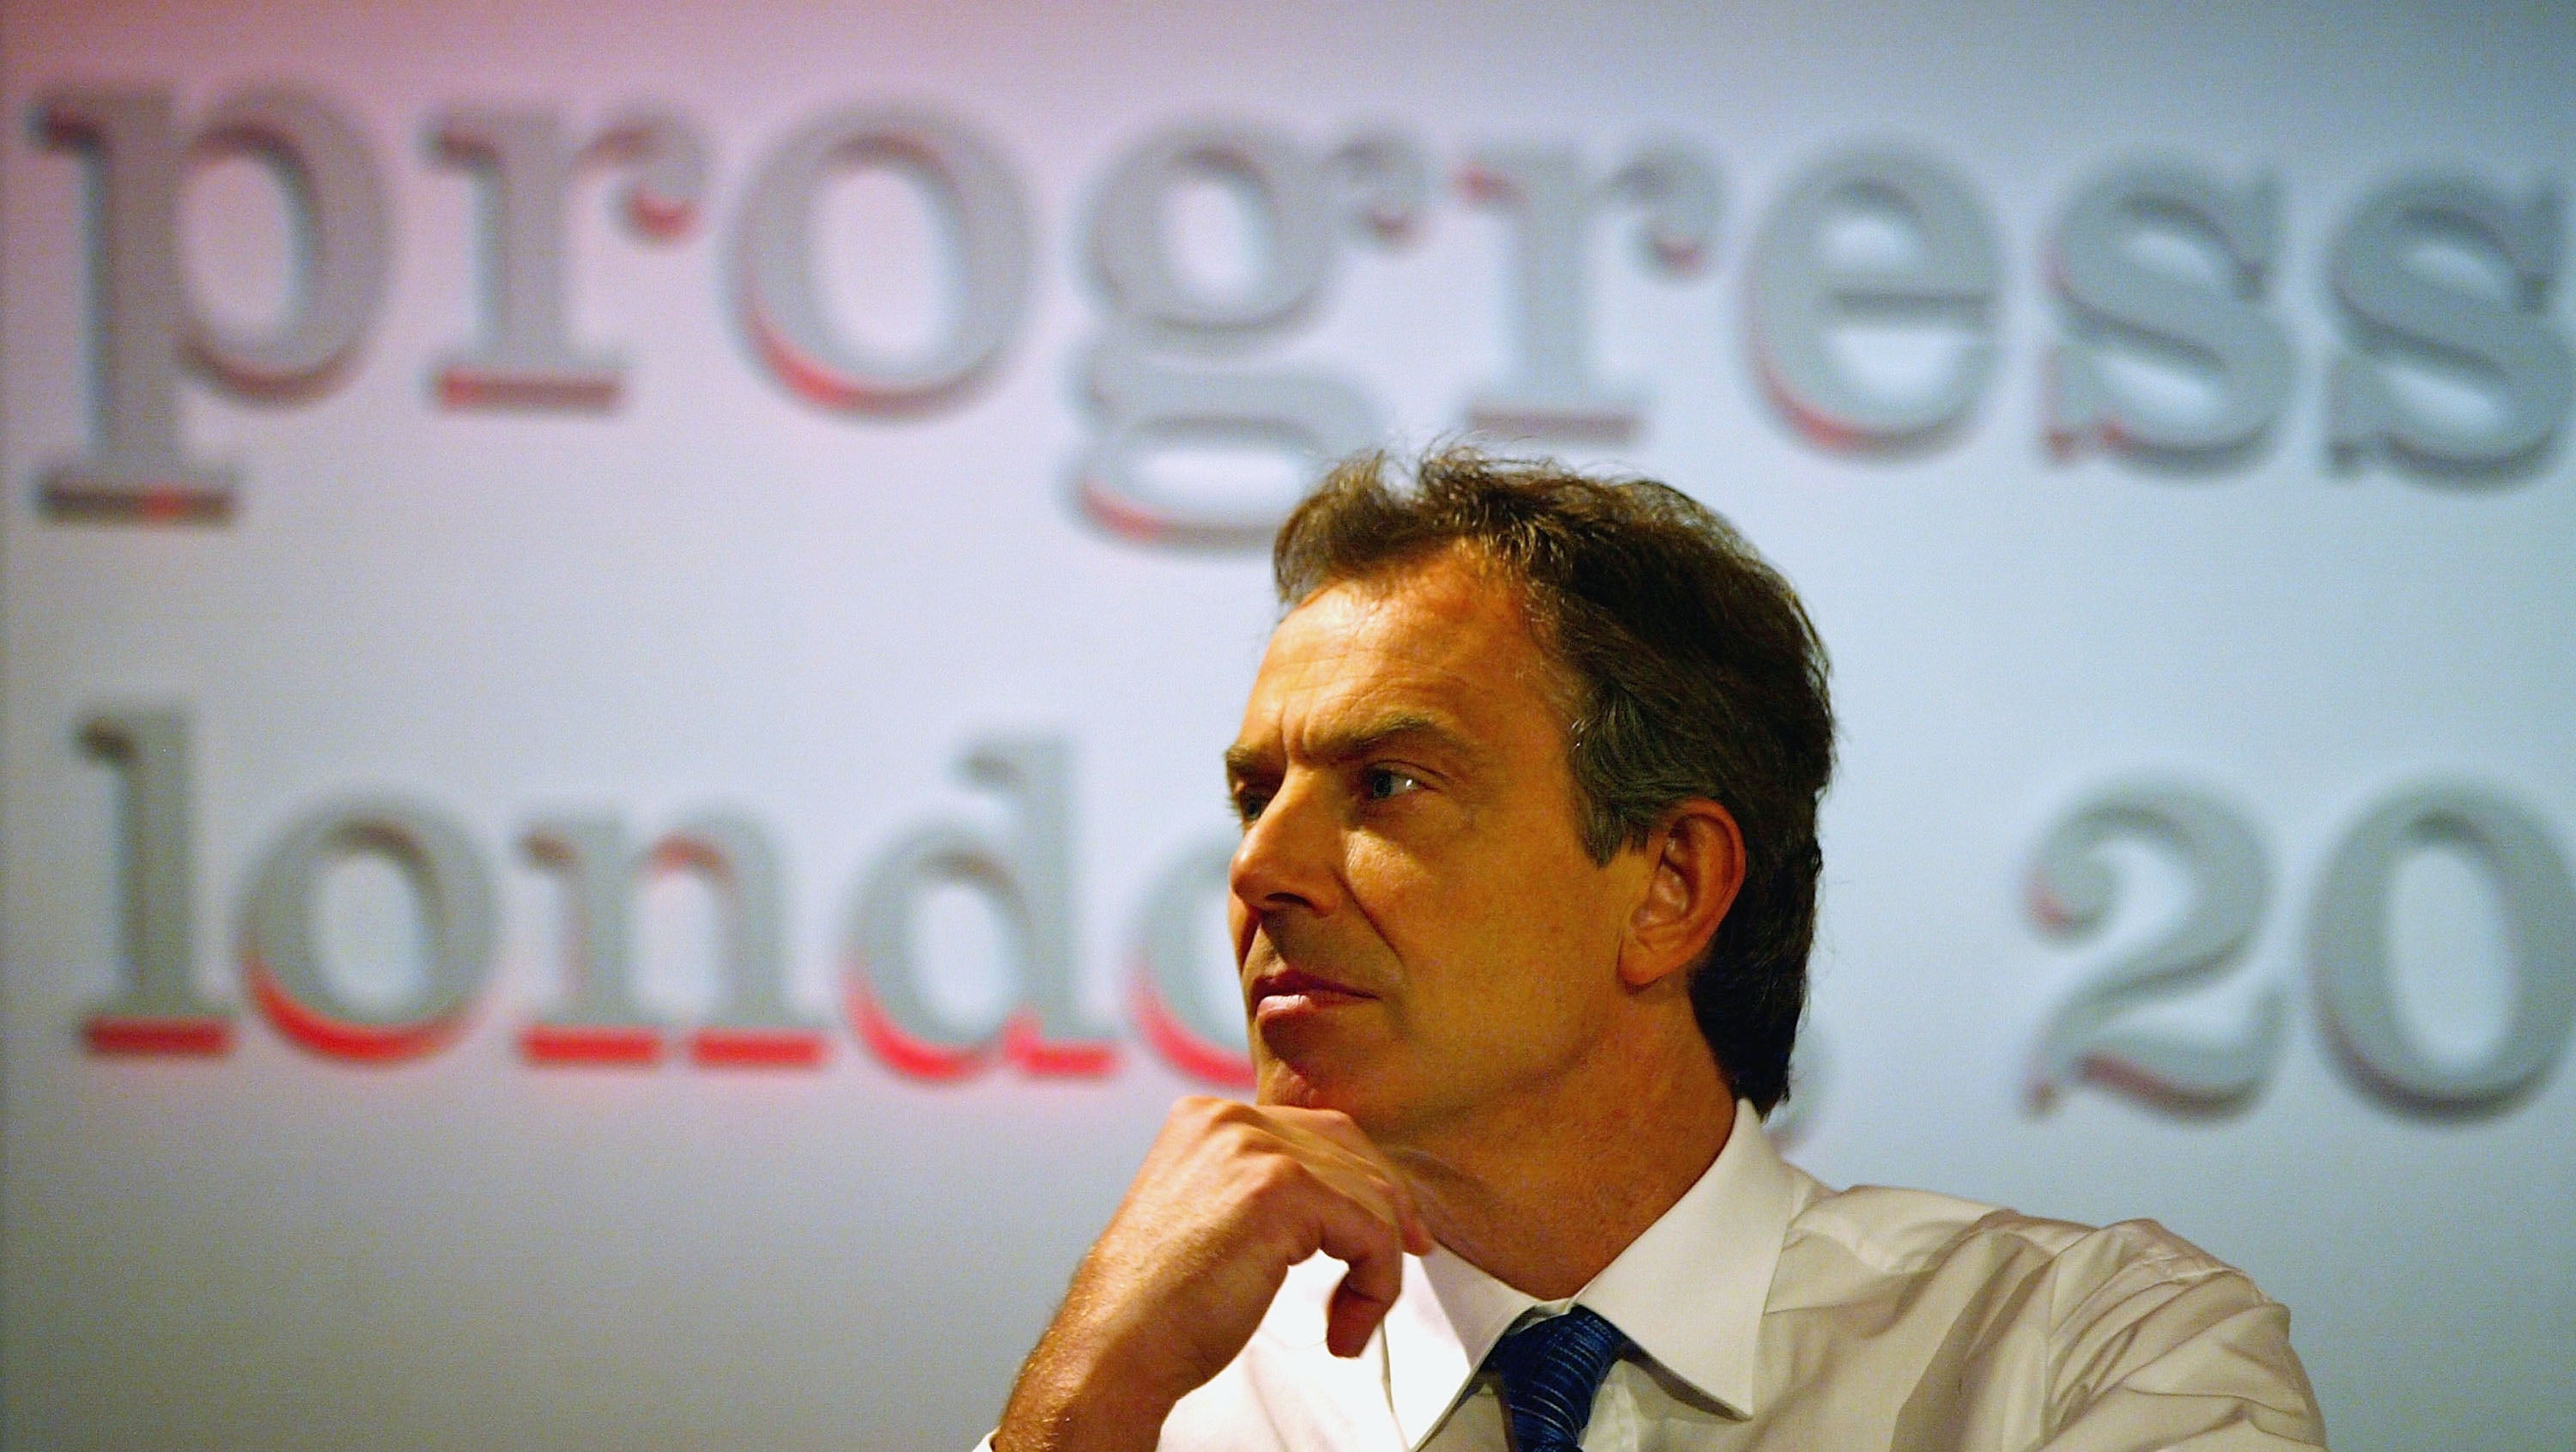 According to Orwell, the word ‘progressive’, one of Blair’s favourites, was in most cases used dishonestly